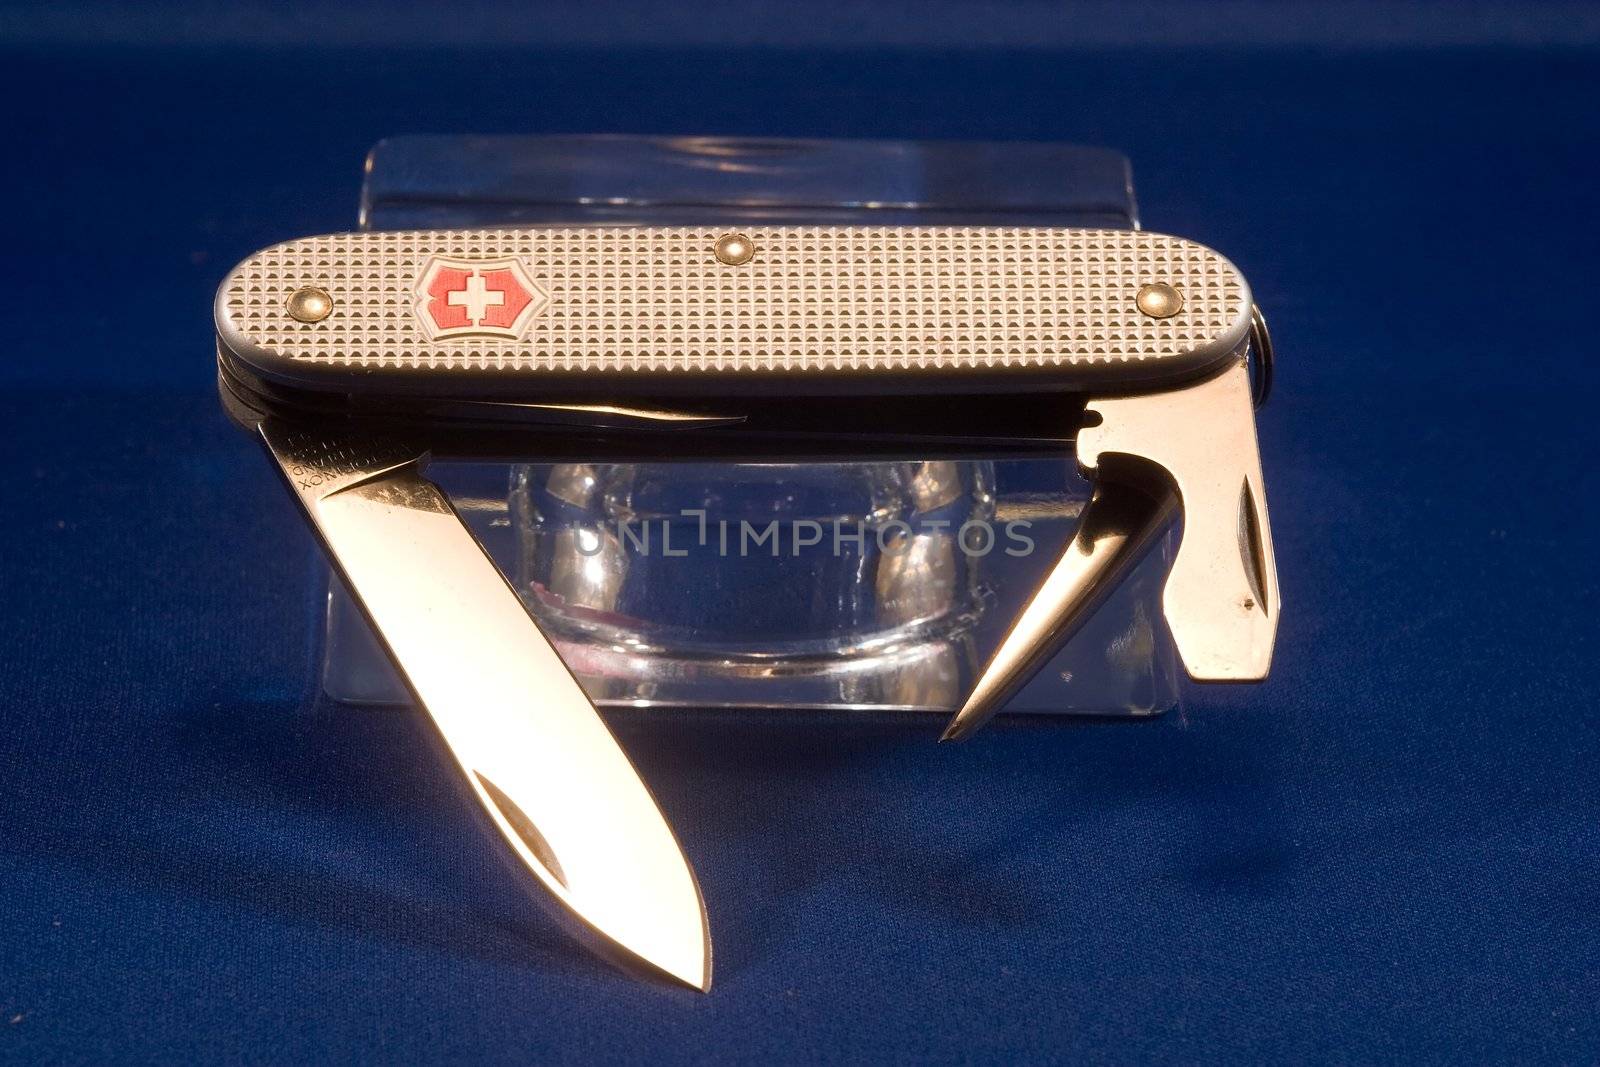 A Swiss Army knife (SAK), is a brand of multi-function pocket knife or multitool.